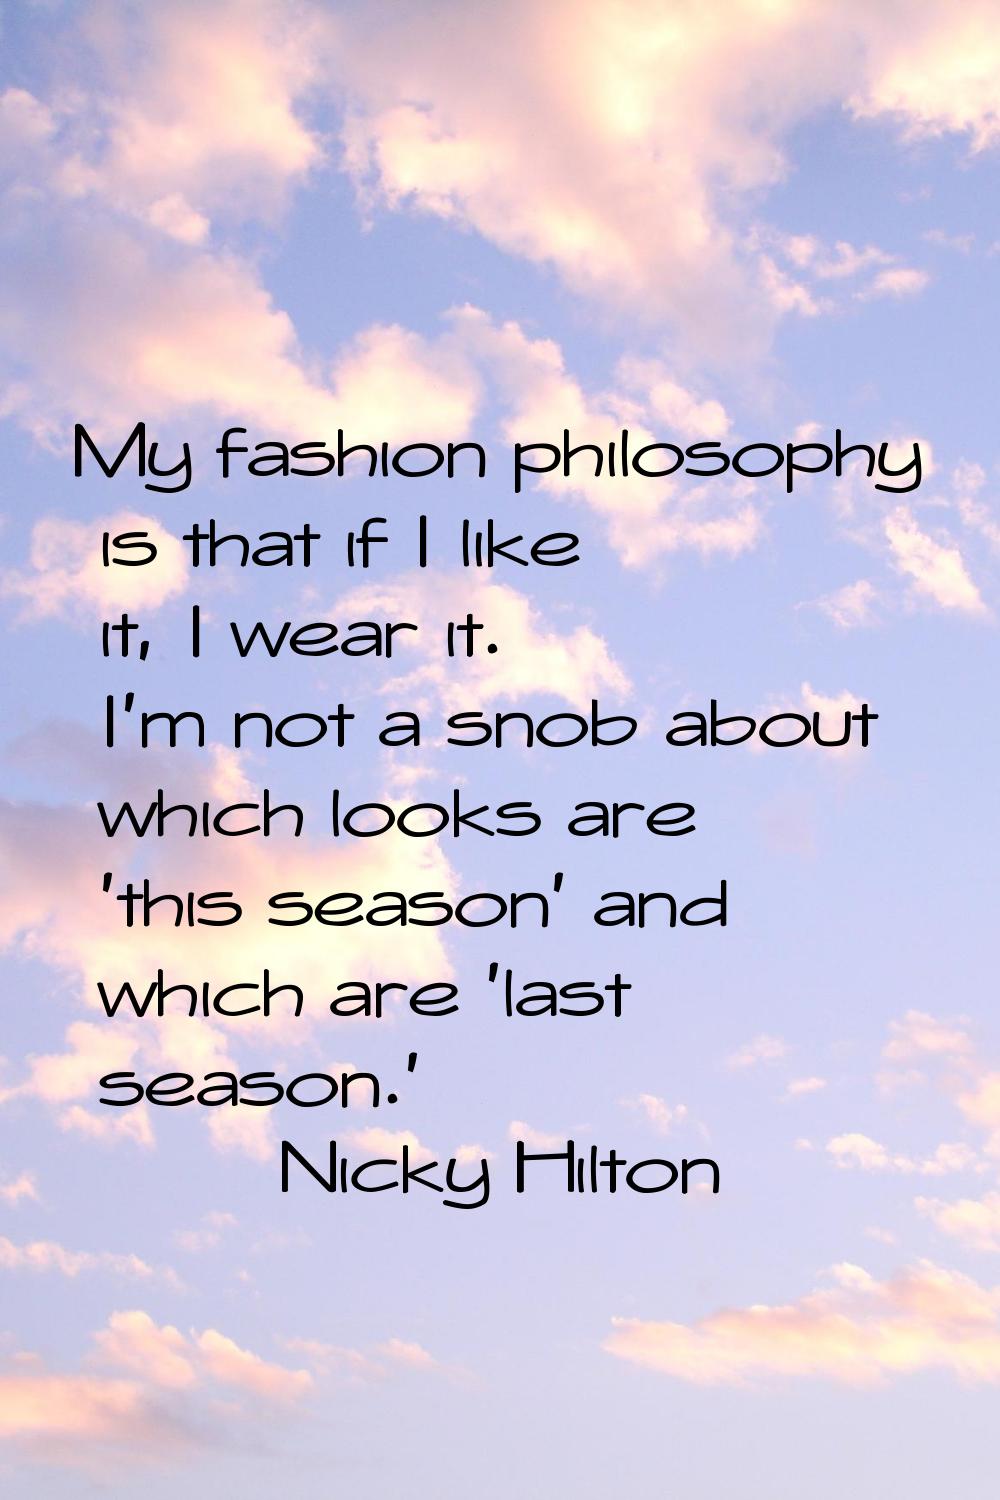 My fashion philosophy is that if I like it, I wear it. I'm not a snob about which looks are 'this s